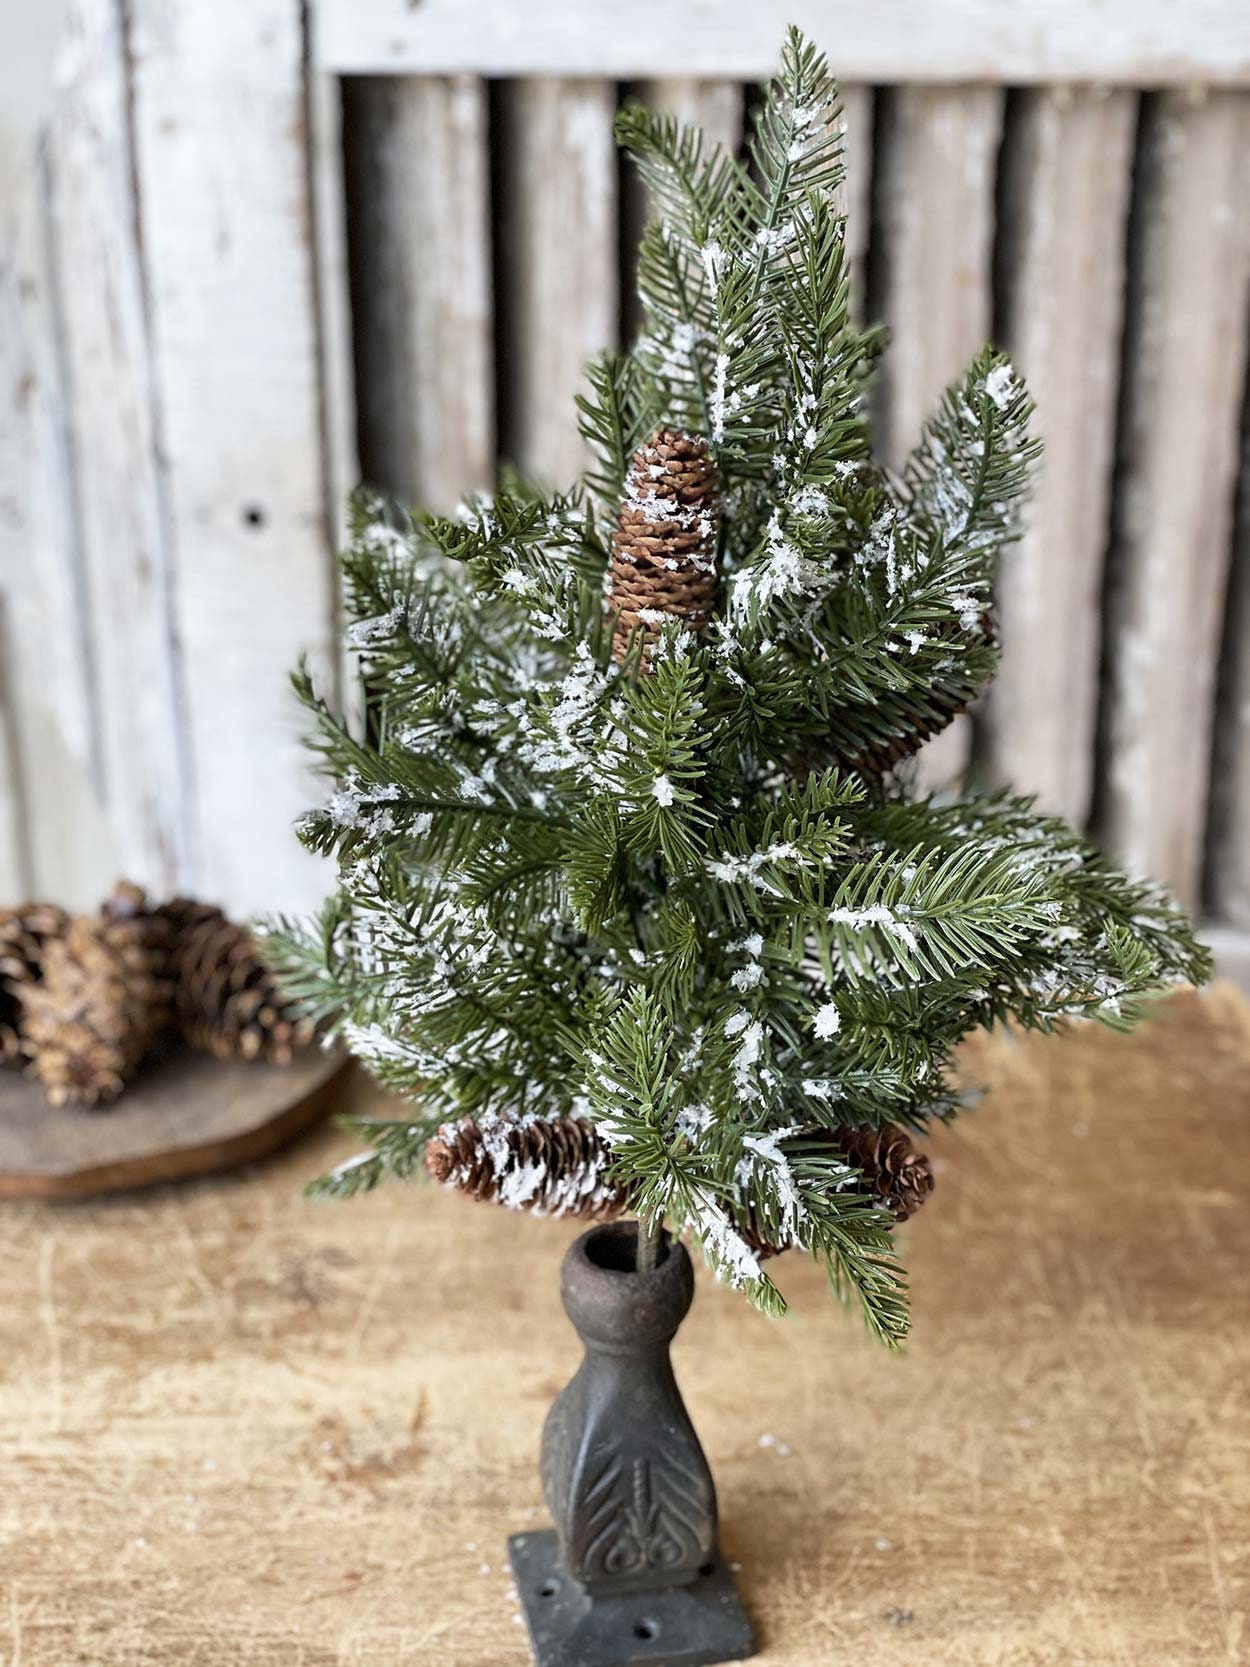 Christmas Decorations Floral Picks and Sprays Pine Branches 16 Pcs Tree  Stems Berries Small Spot Evergreen Artificial Holly for Xmas White 